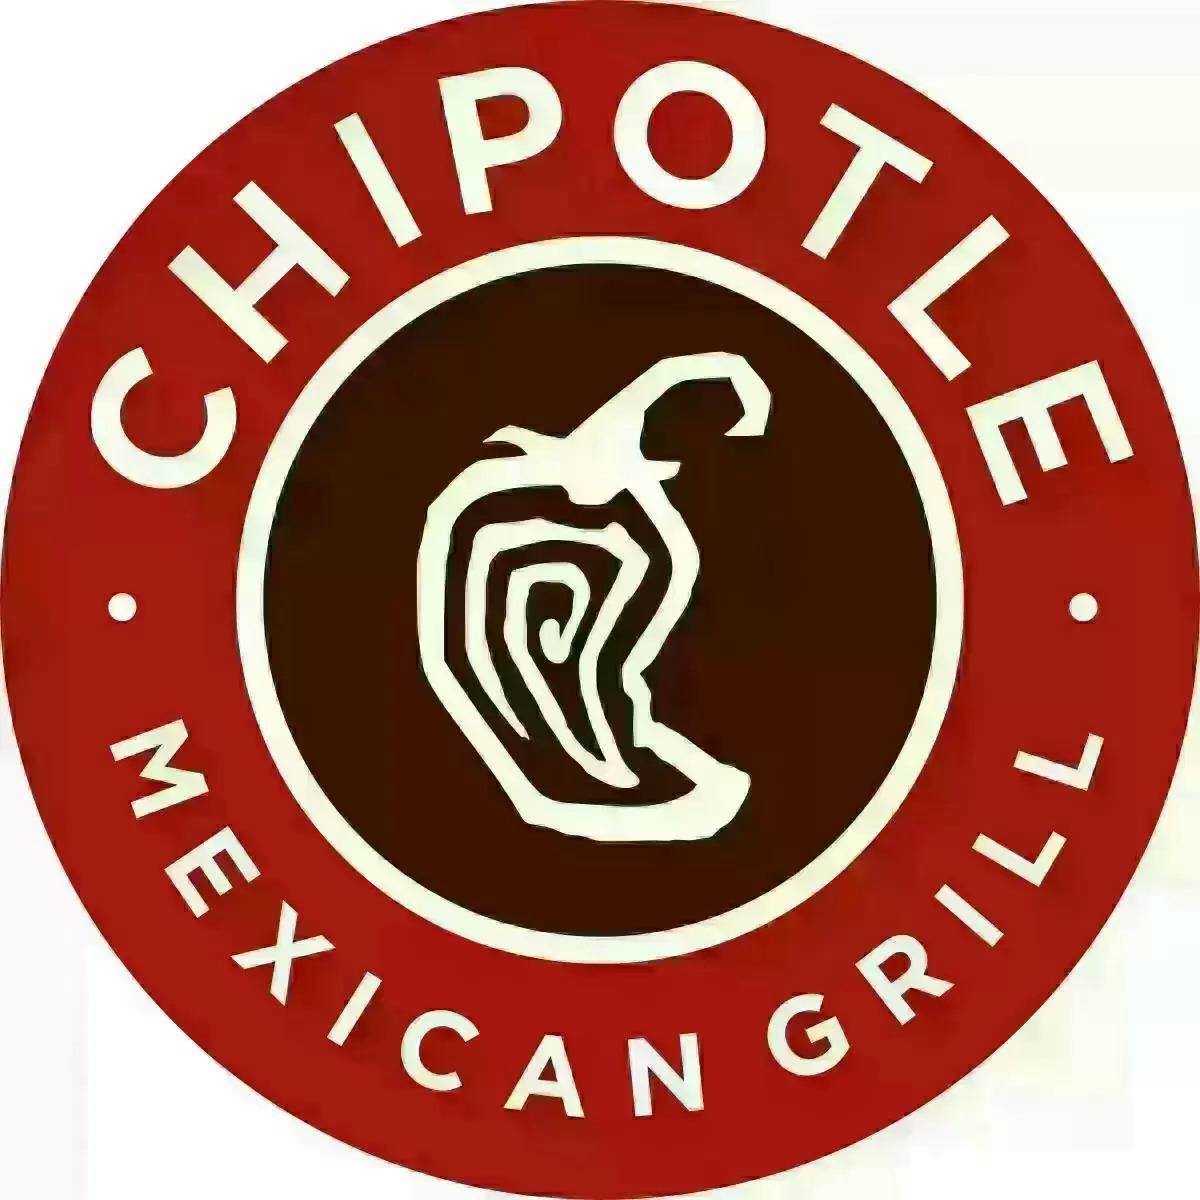 Chipotle Discounted Gift Card for 10% Off